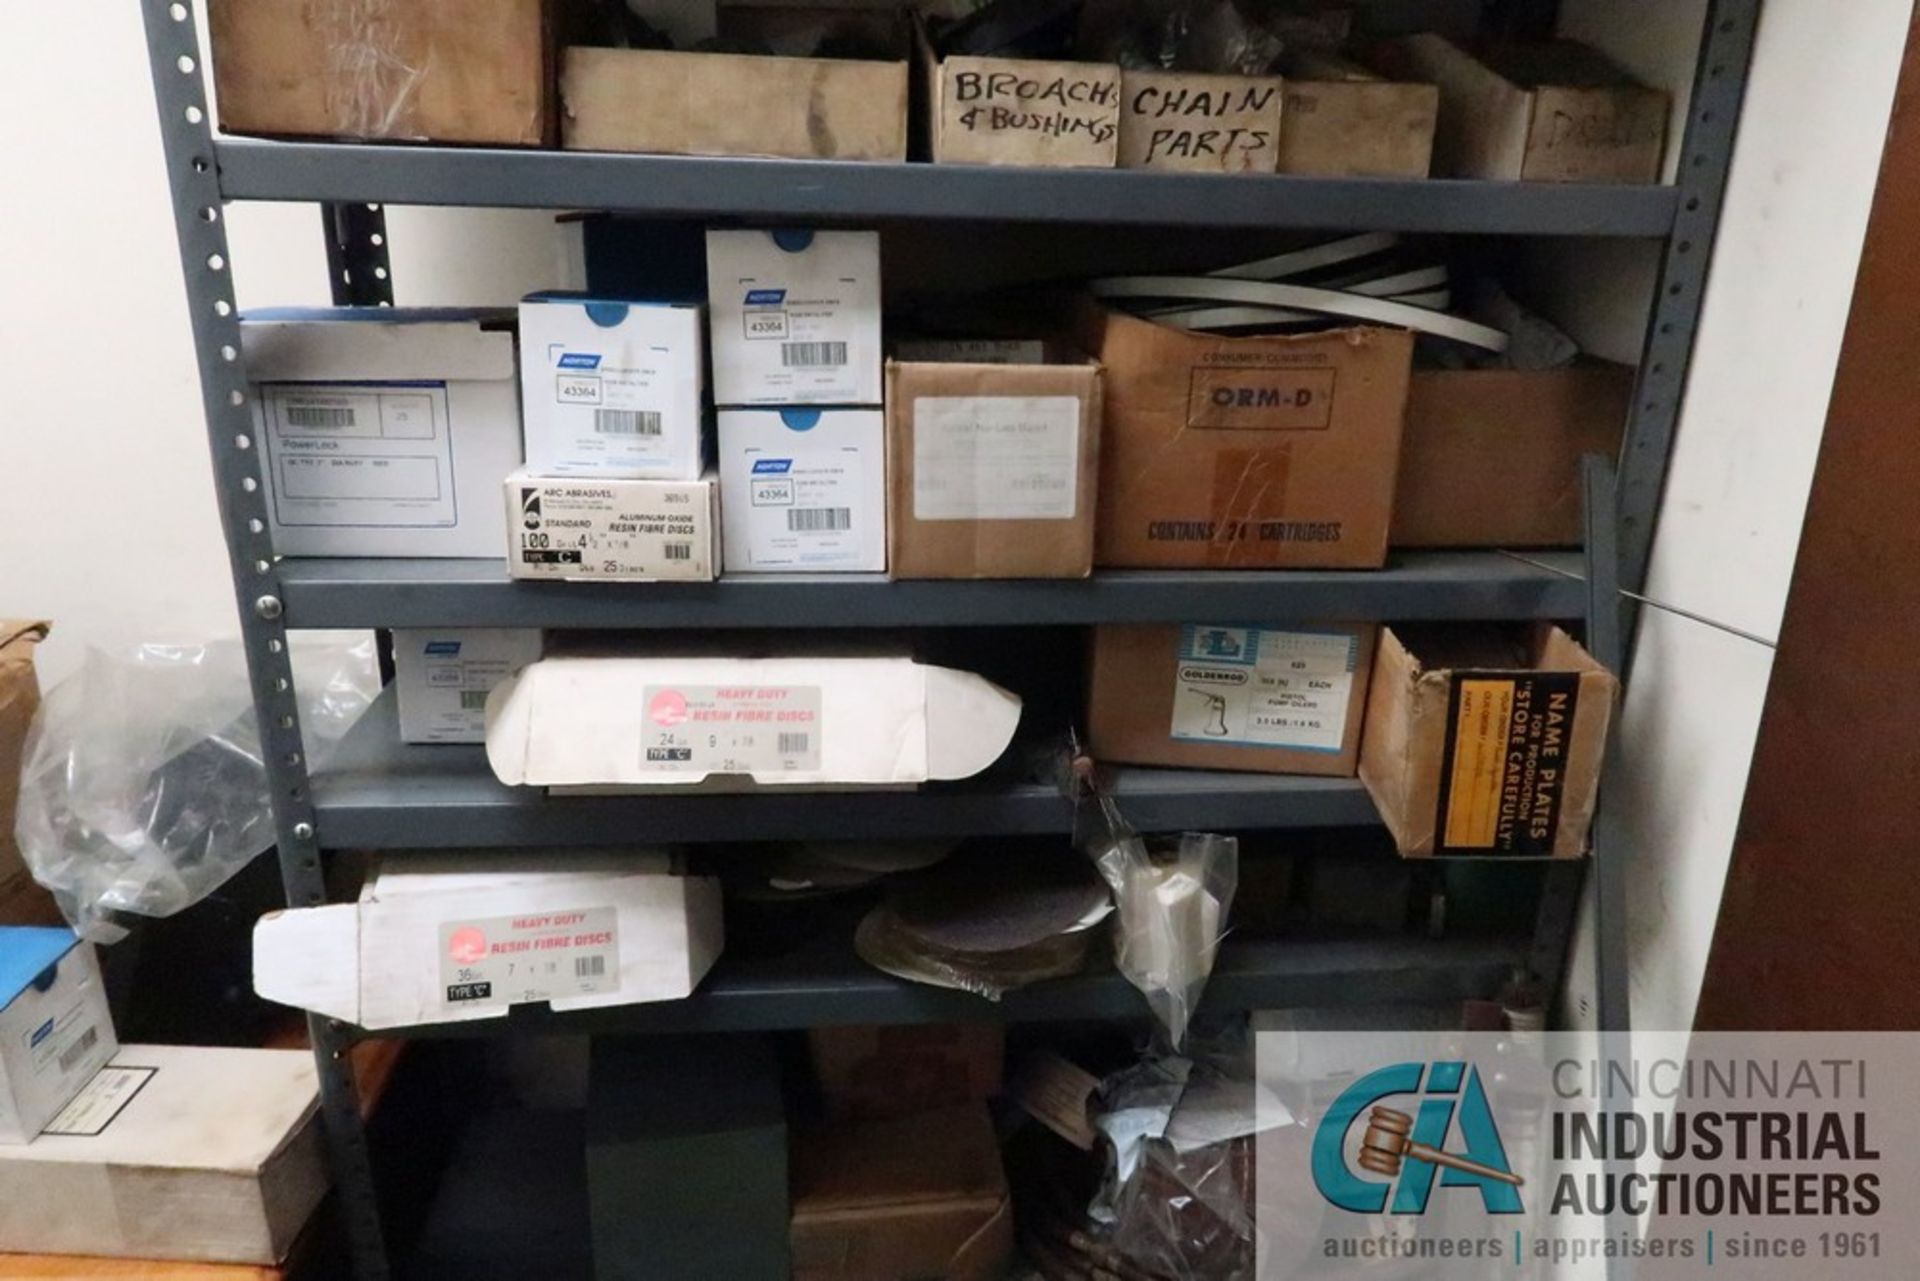 CONTENTS OF STORAGE ROOM - MISCELLANEOUS MACHINE TOOLING, PERISHABLES, ABRASIVES, OFFICE SUPPLIES, - Image 3 of 7